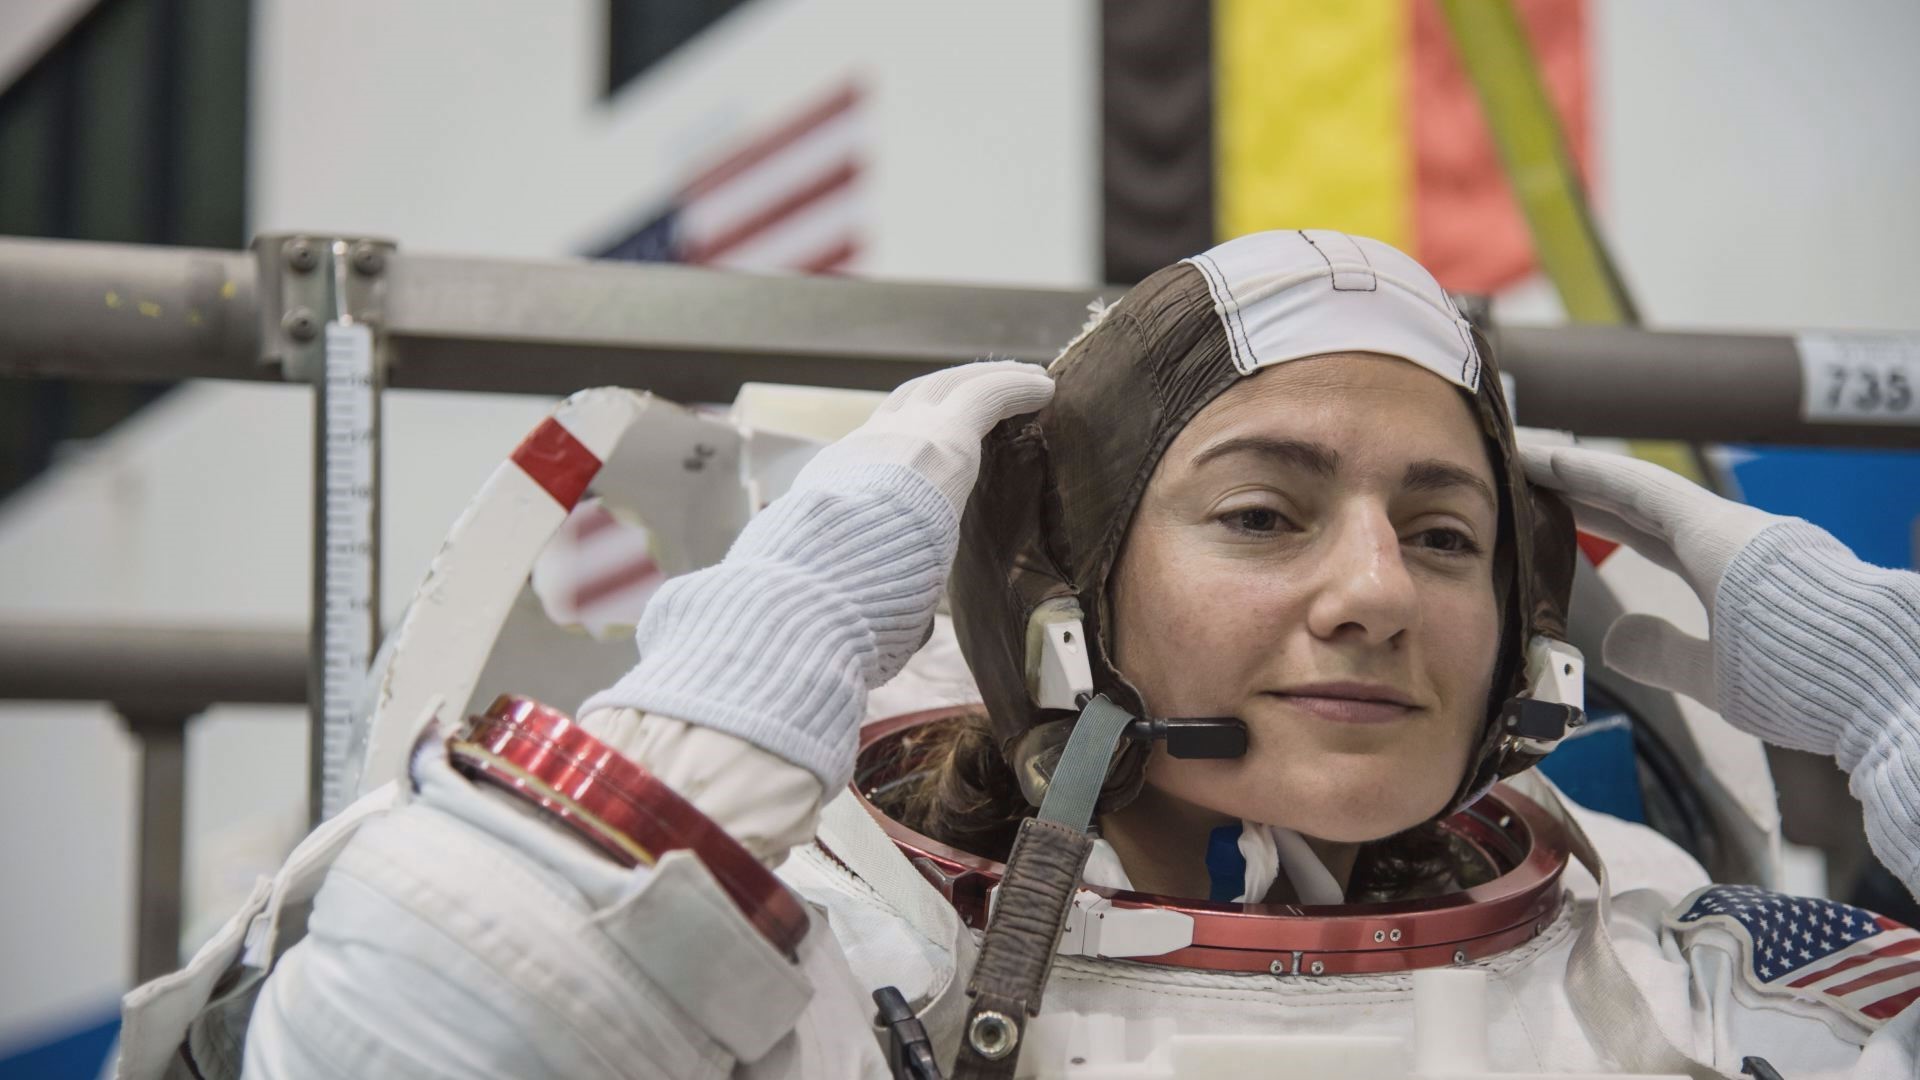 Jessica Meir from Caribou is heading to space for six months on her first flight, Expedition 61.